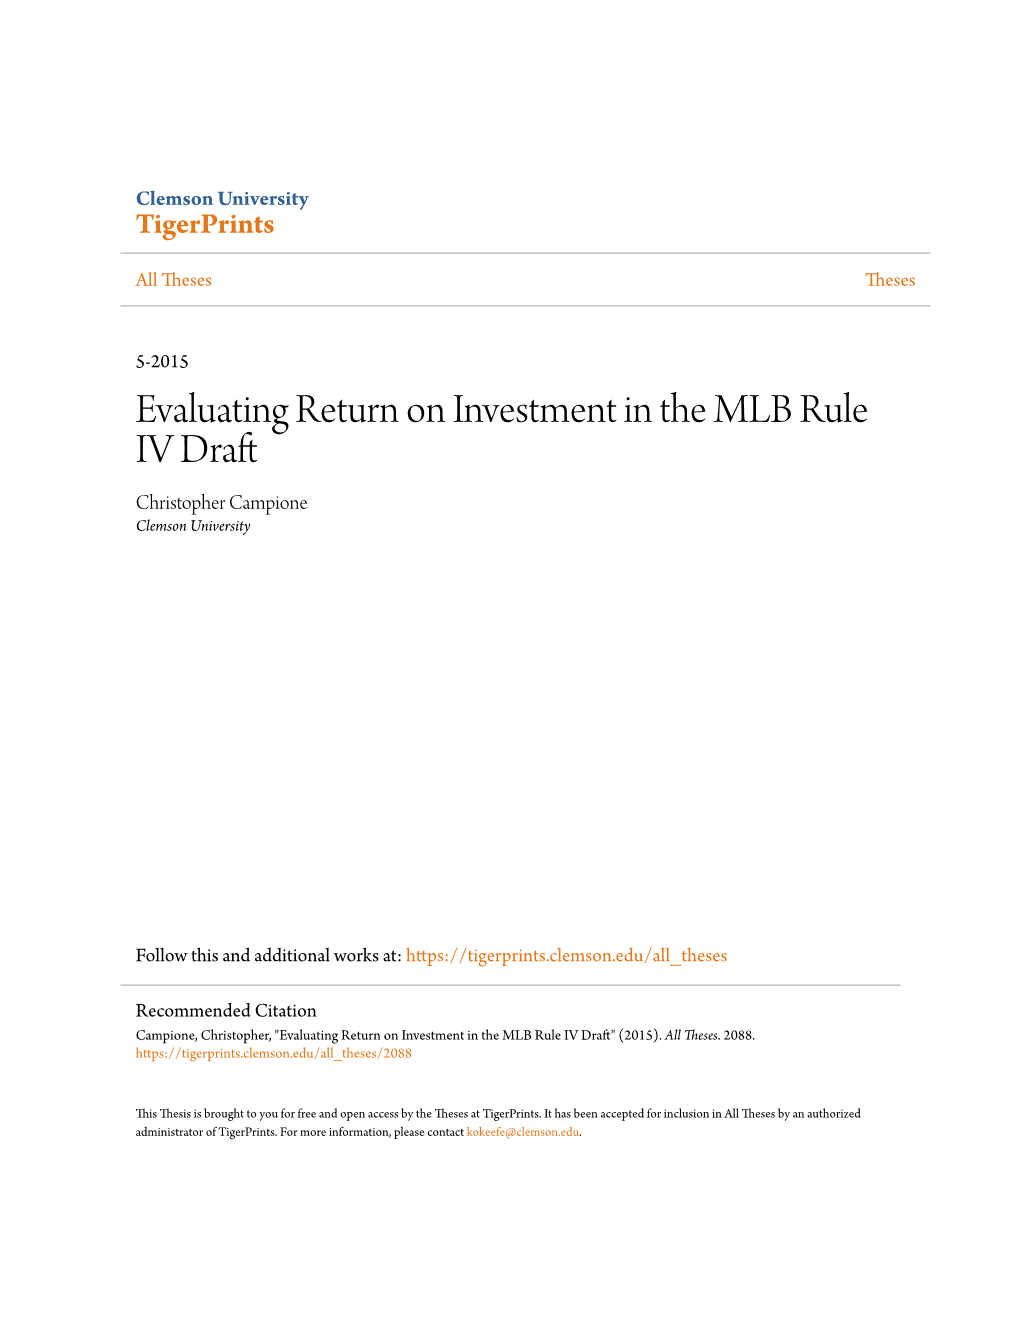 Evaluating Return on Investment in the MLB Rule IV Draft Christopher Campione Clemson University